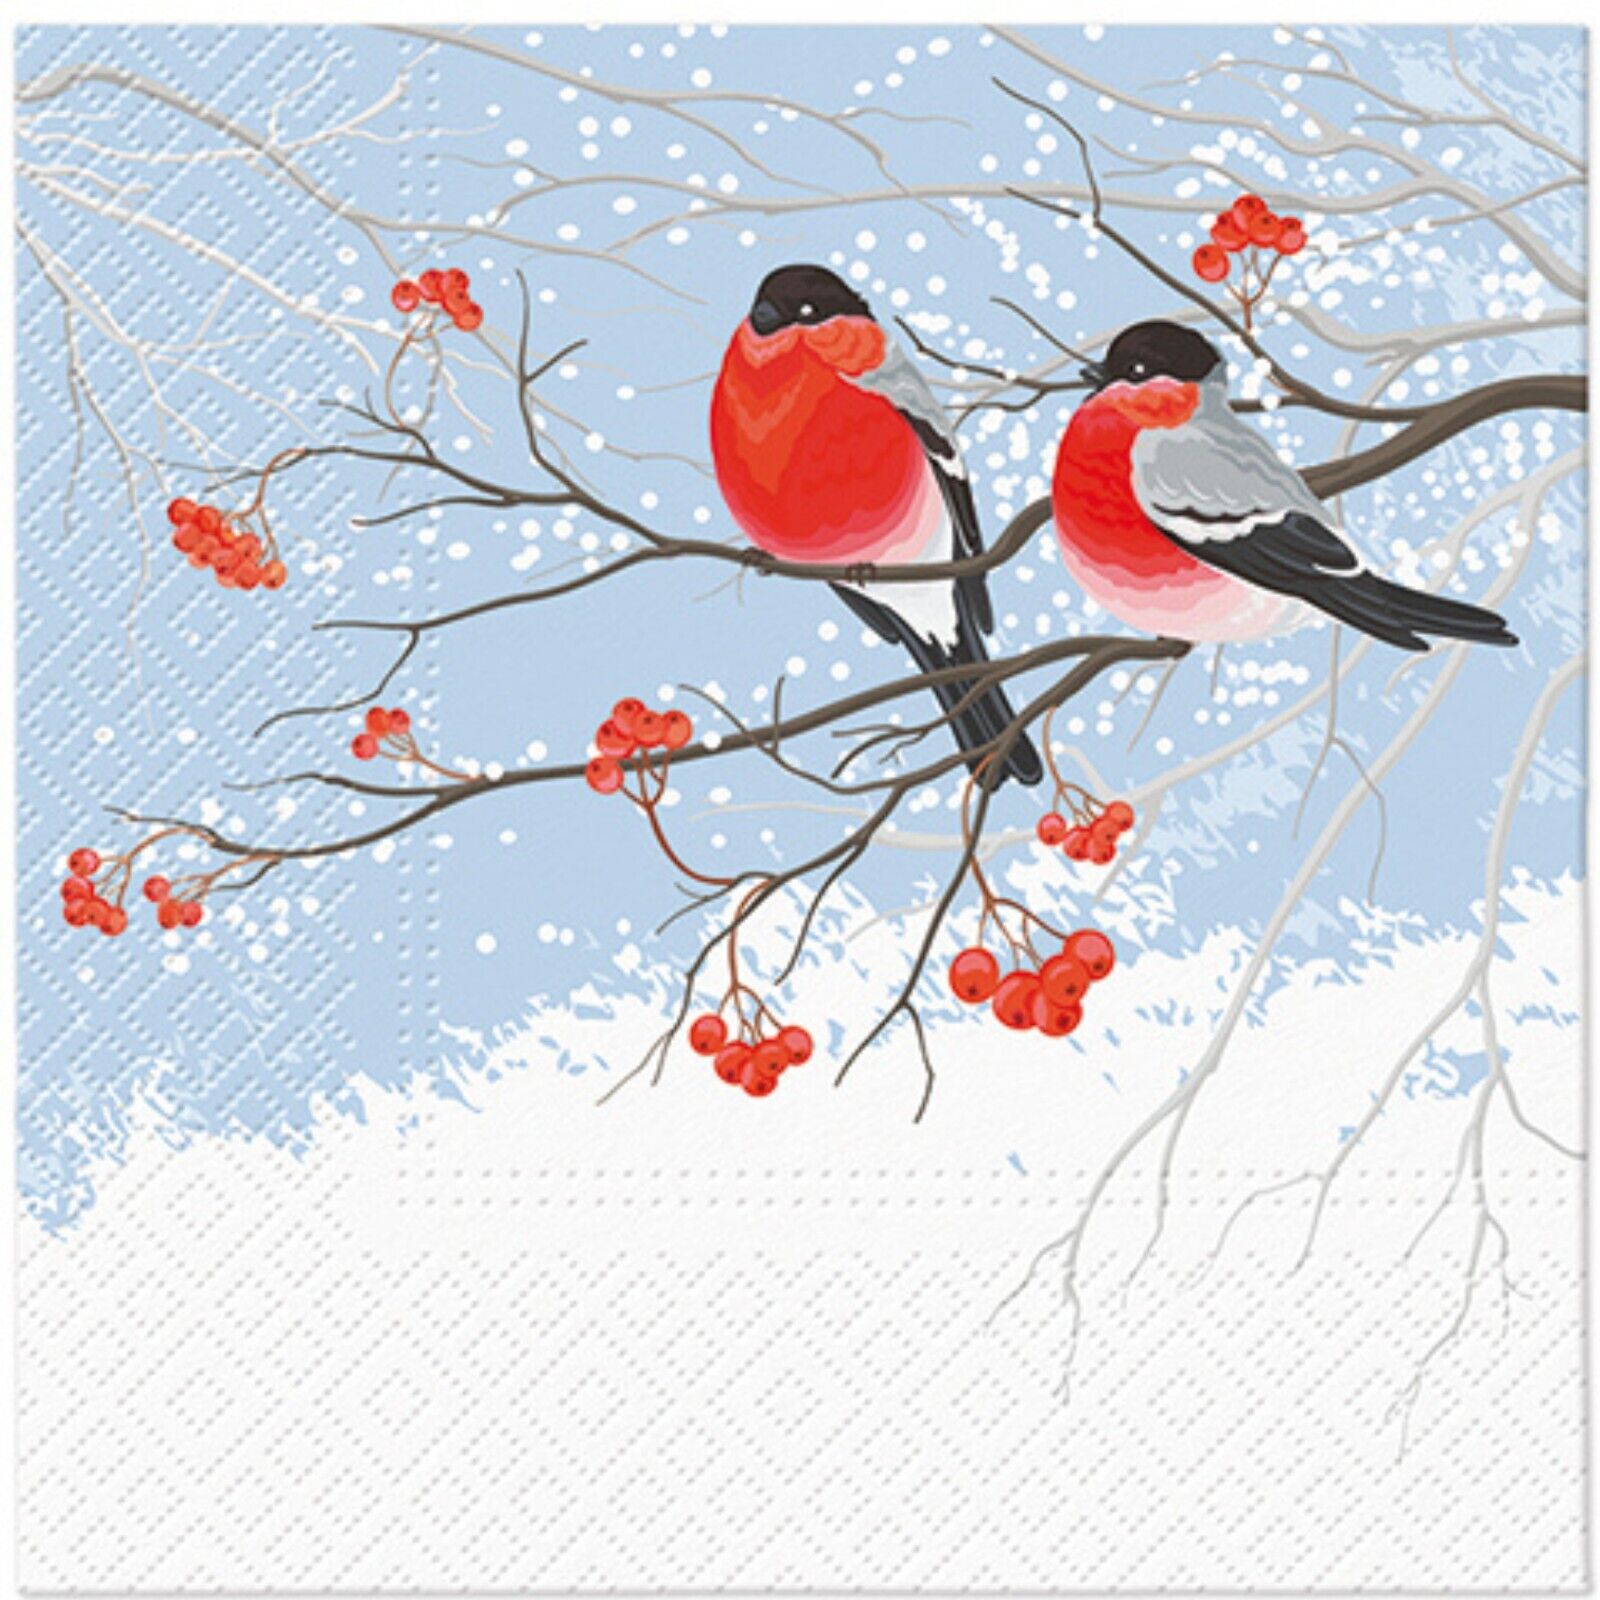 (2) Decoupage Paper Napkins - Christmas Winter Birds Two Luncheon Napkin Holiday